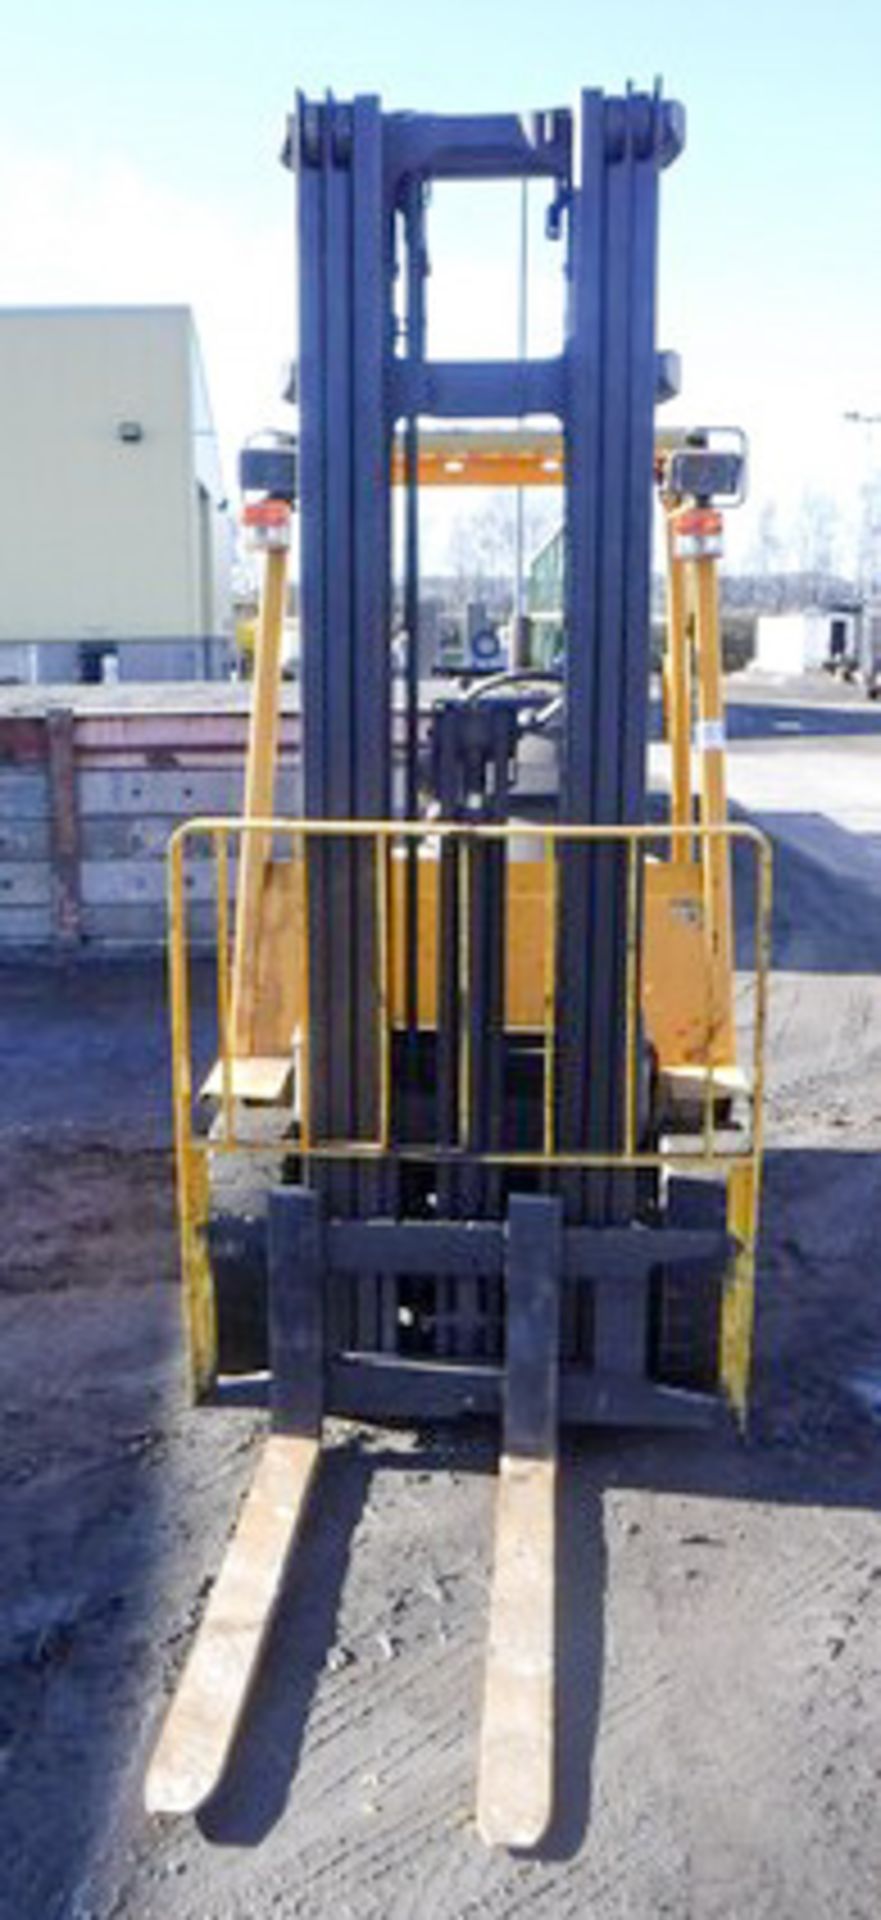 2002 HYSTER H2.50XM DIESEL FORKLIFT. SN H177B327392. 6068 HRS (NOT VERIFIED) - Image 6 of 13